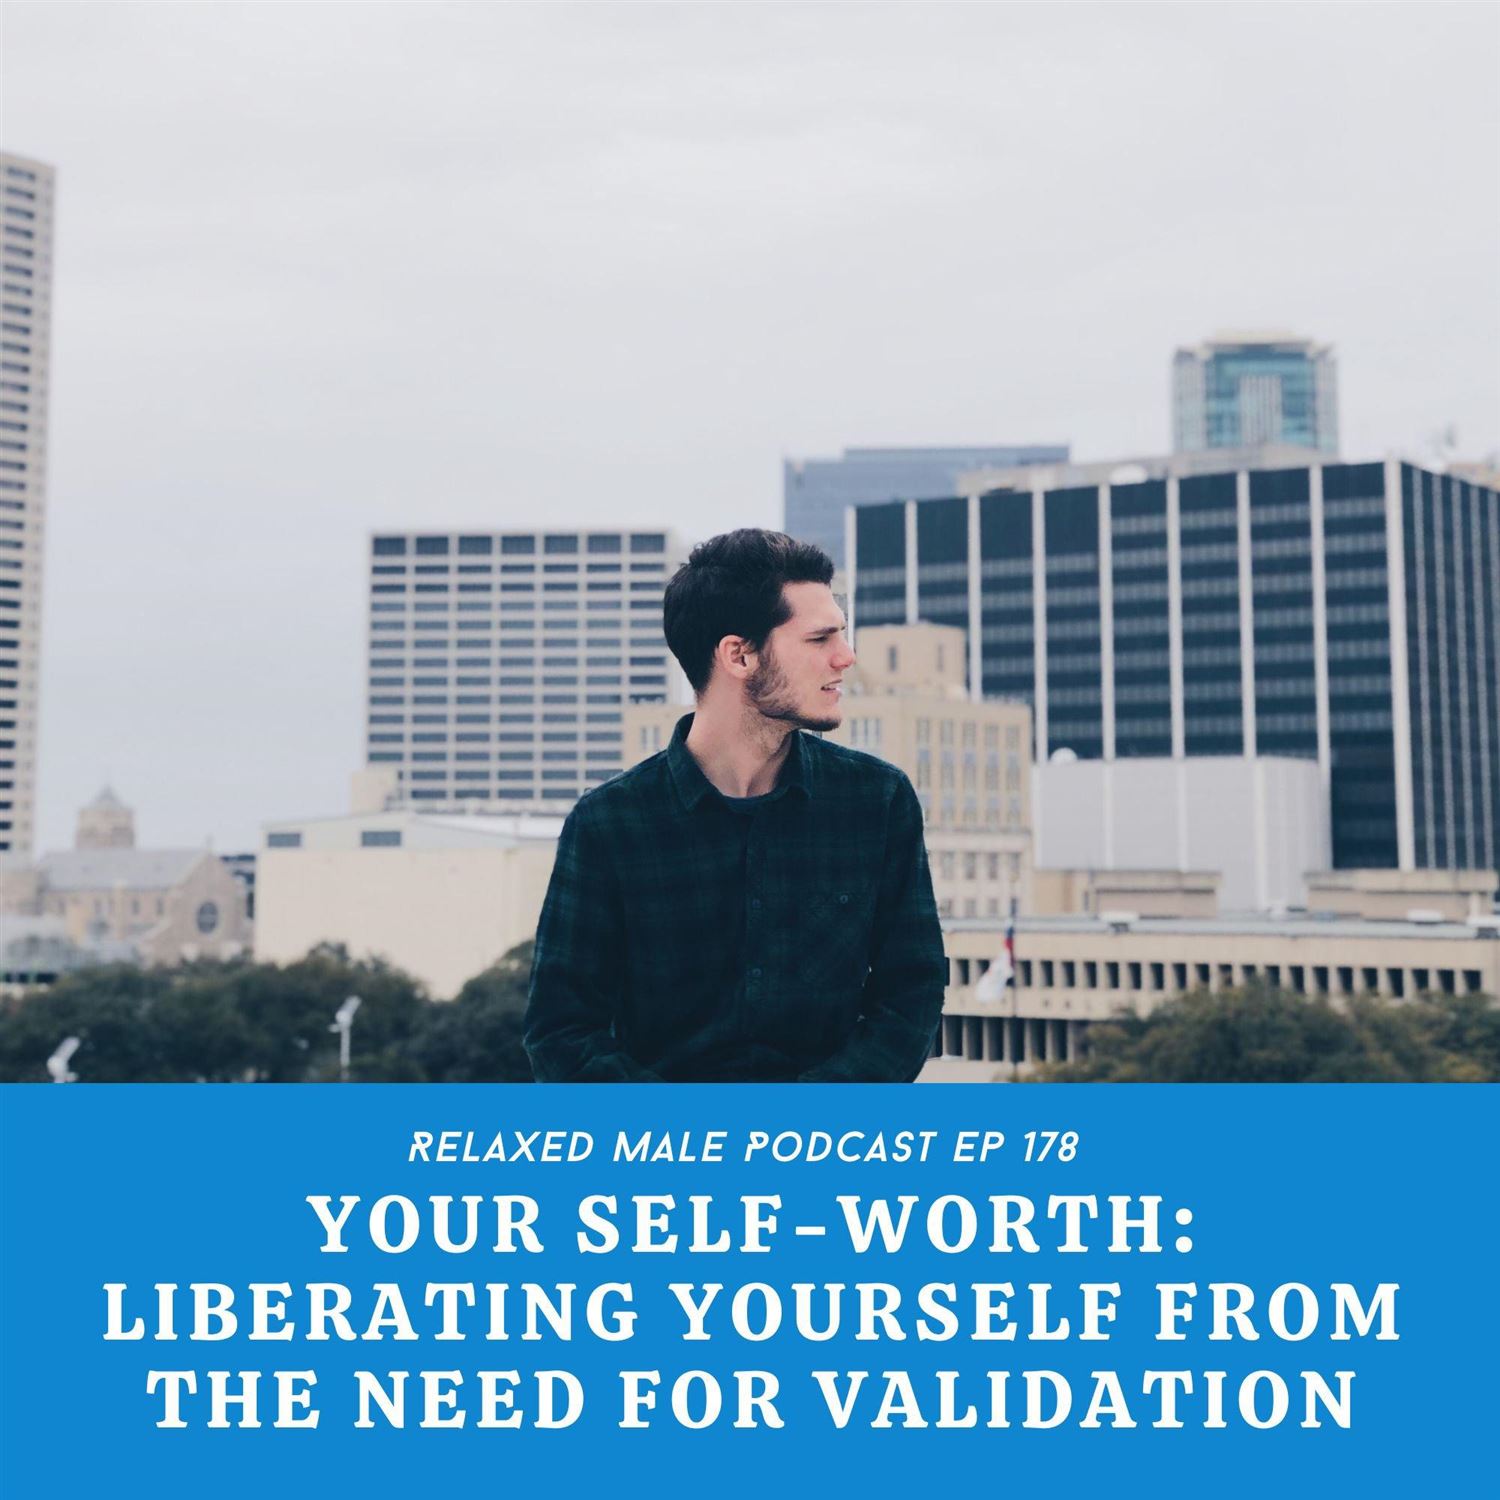 Liberating Yourself from the Need for Validation